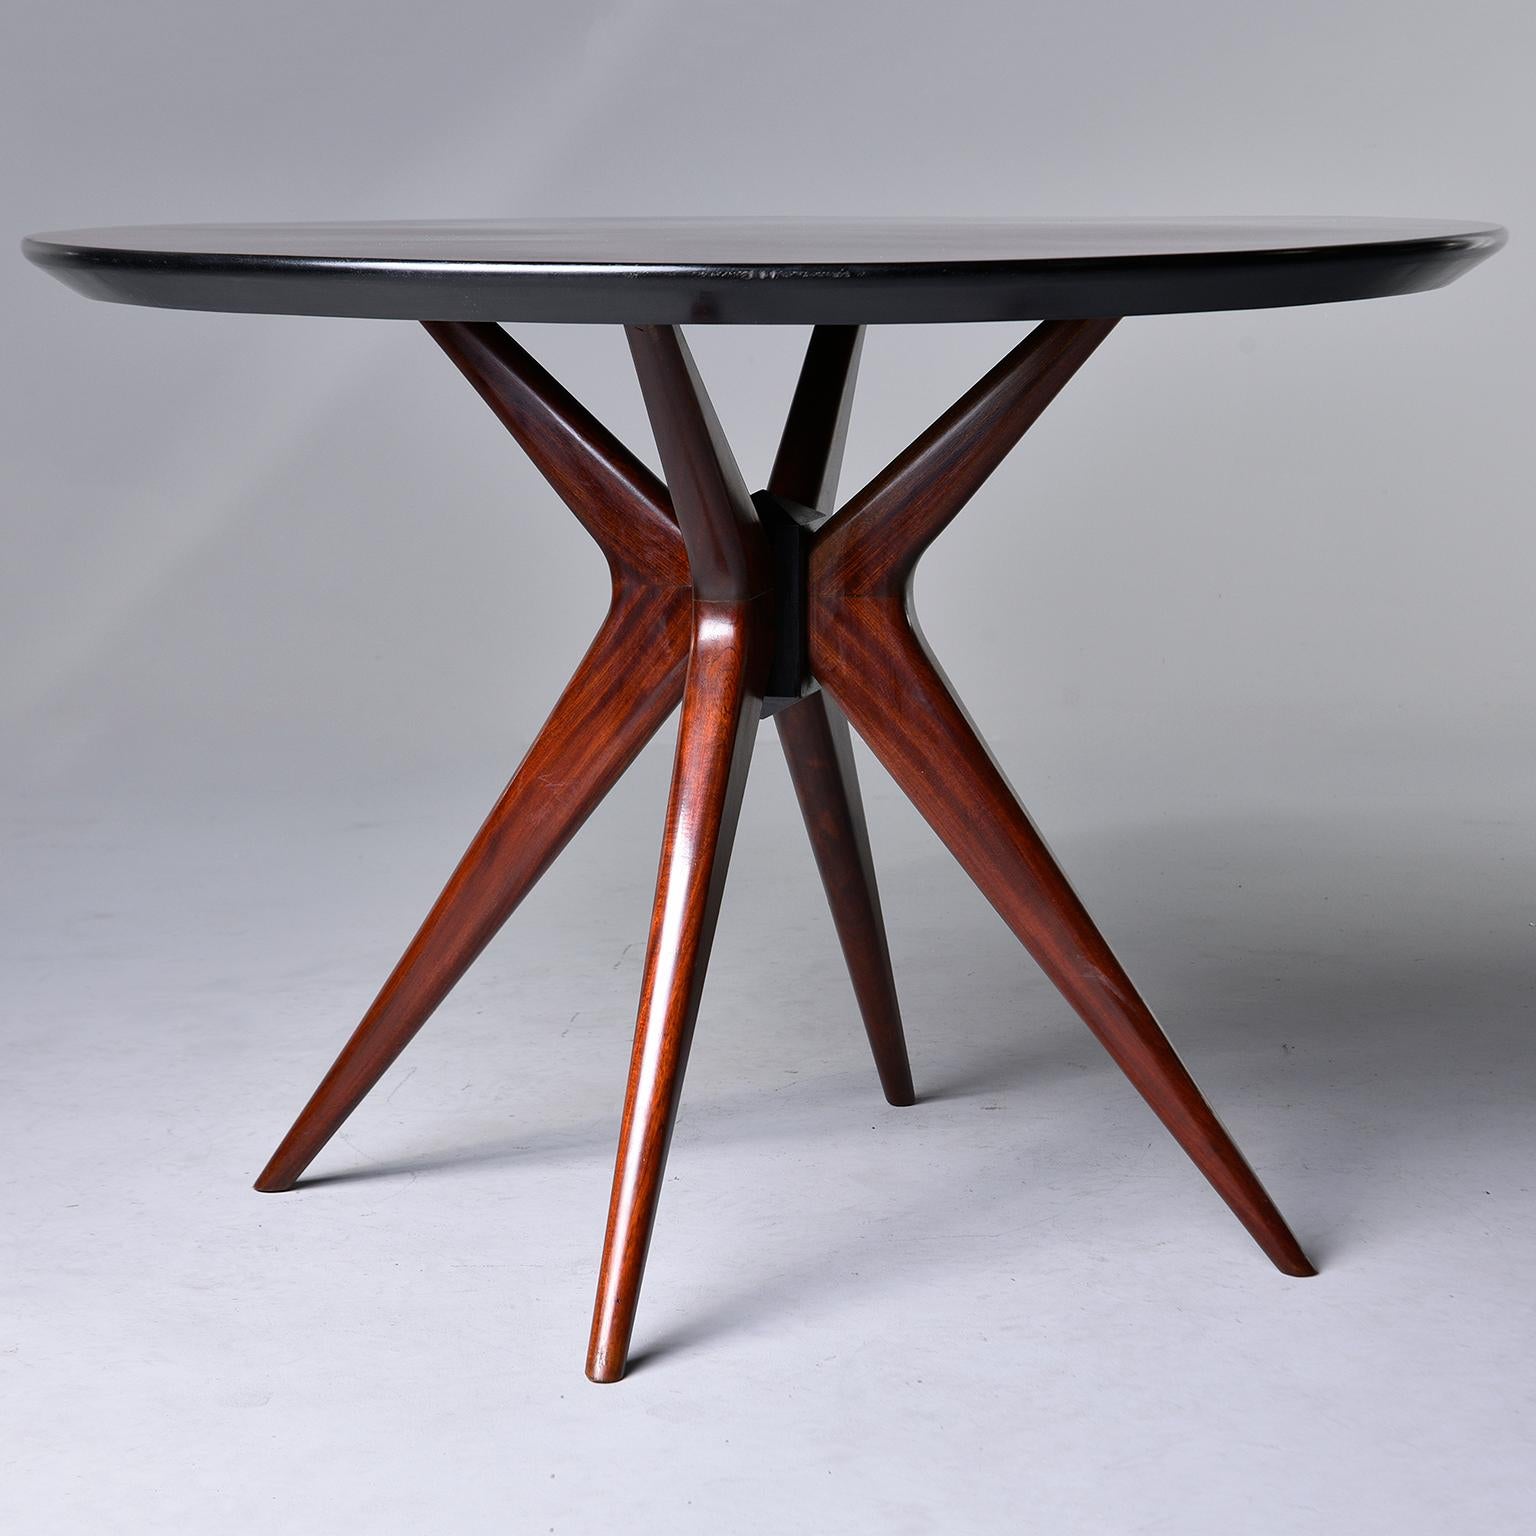 Italian center, breakfast or game table has a round top with rosewood veneer arranged so that the graining forms a star burst pattern, circa 1960s. The base of the table consists of four tapered, boomerang-shaped legs. Unknown maker.